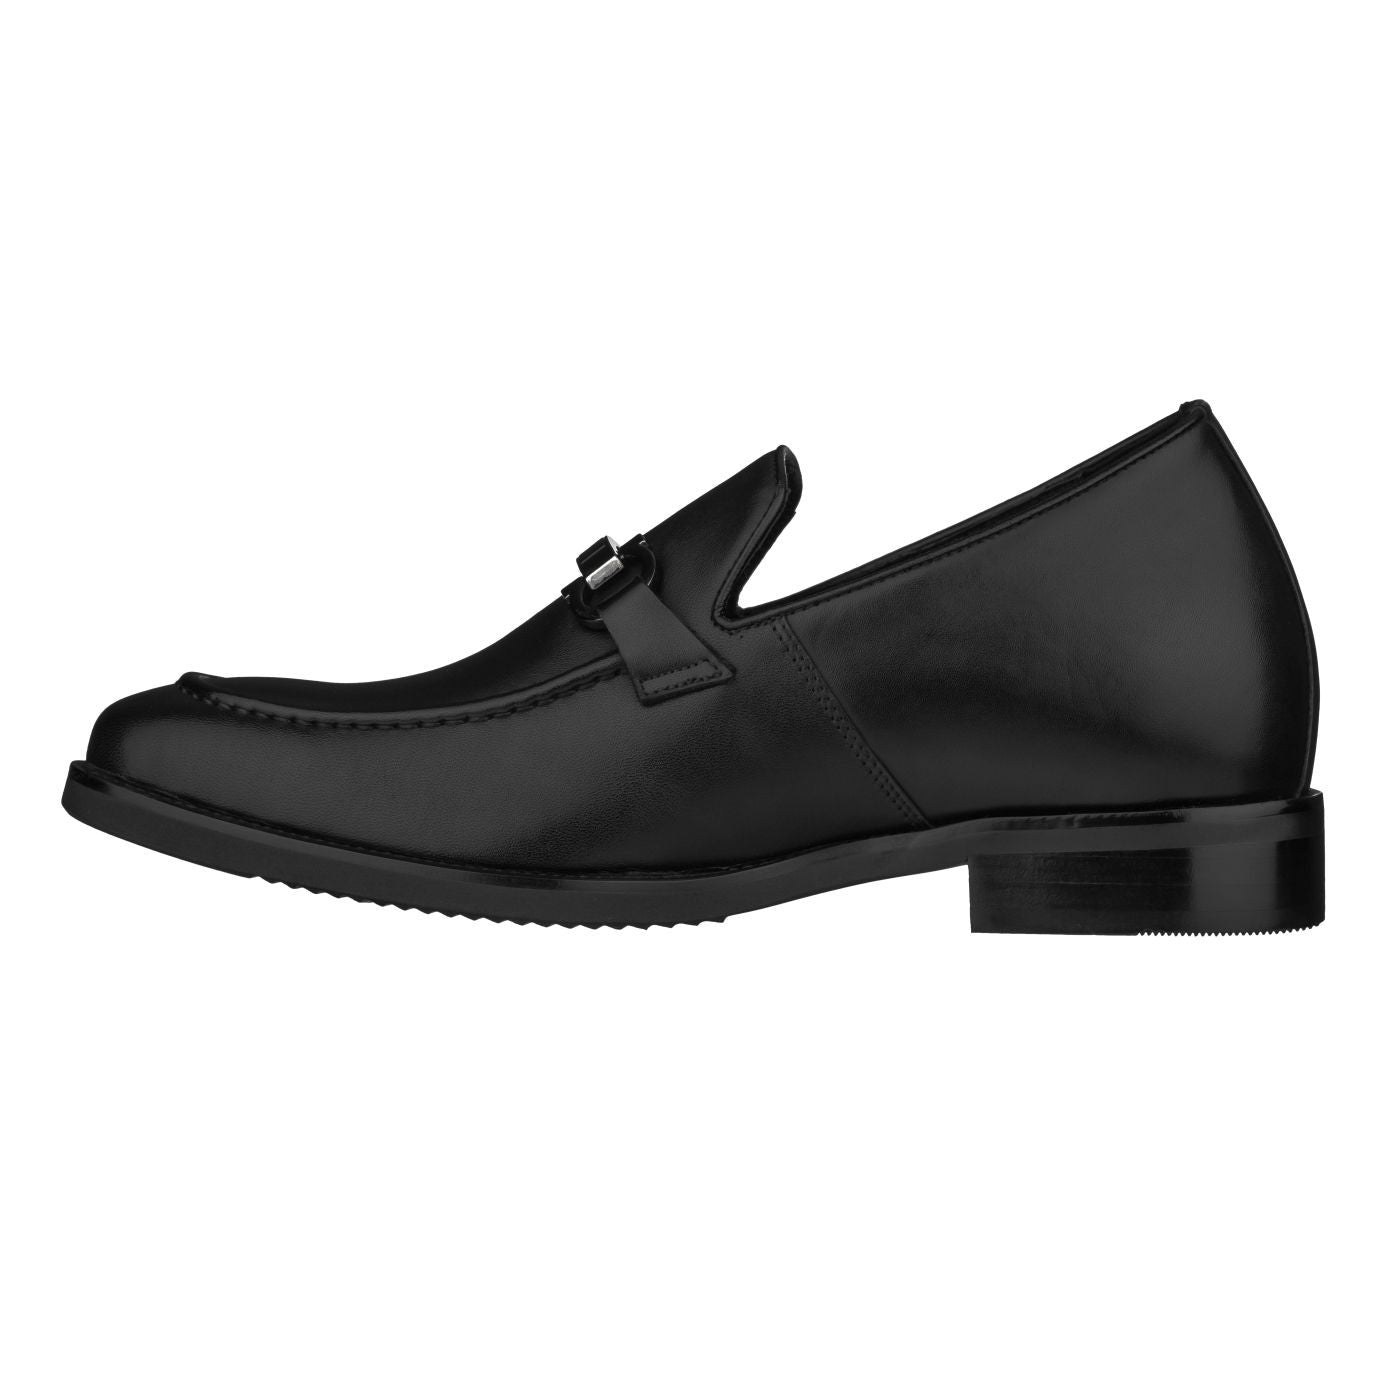 Elevator shoes height increase CALTO - S2110 - 3.0 Inches Taller (Black)